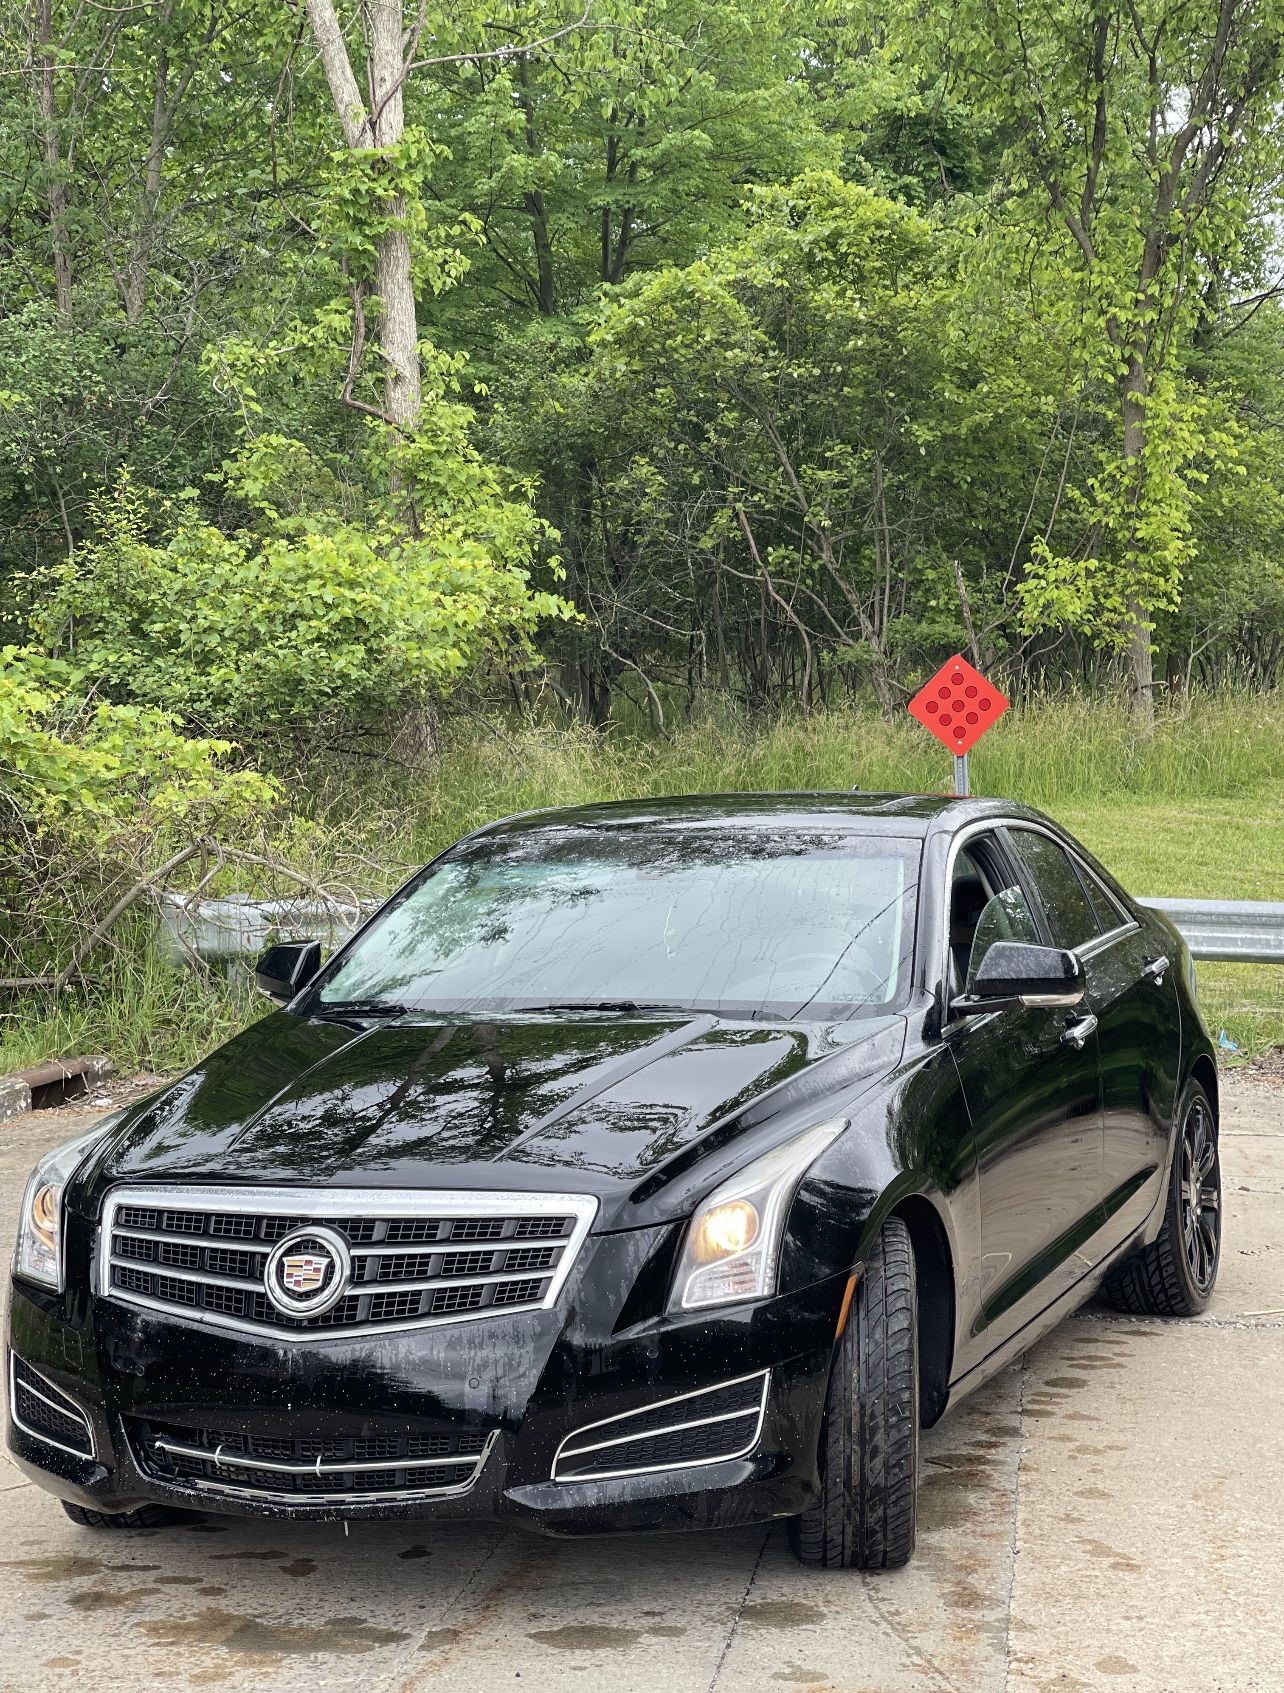 2014 Cadillac ATS4 AWD 2.0T  Only 93k miles Brand new battery & tires  Brand new alternator & serpentine belt  Leather interior with heated s